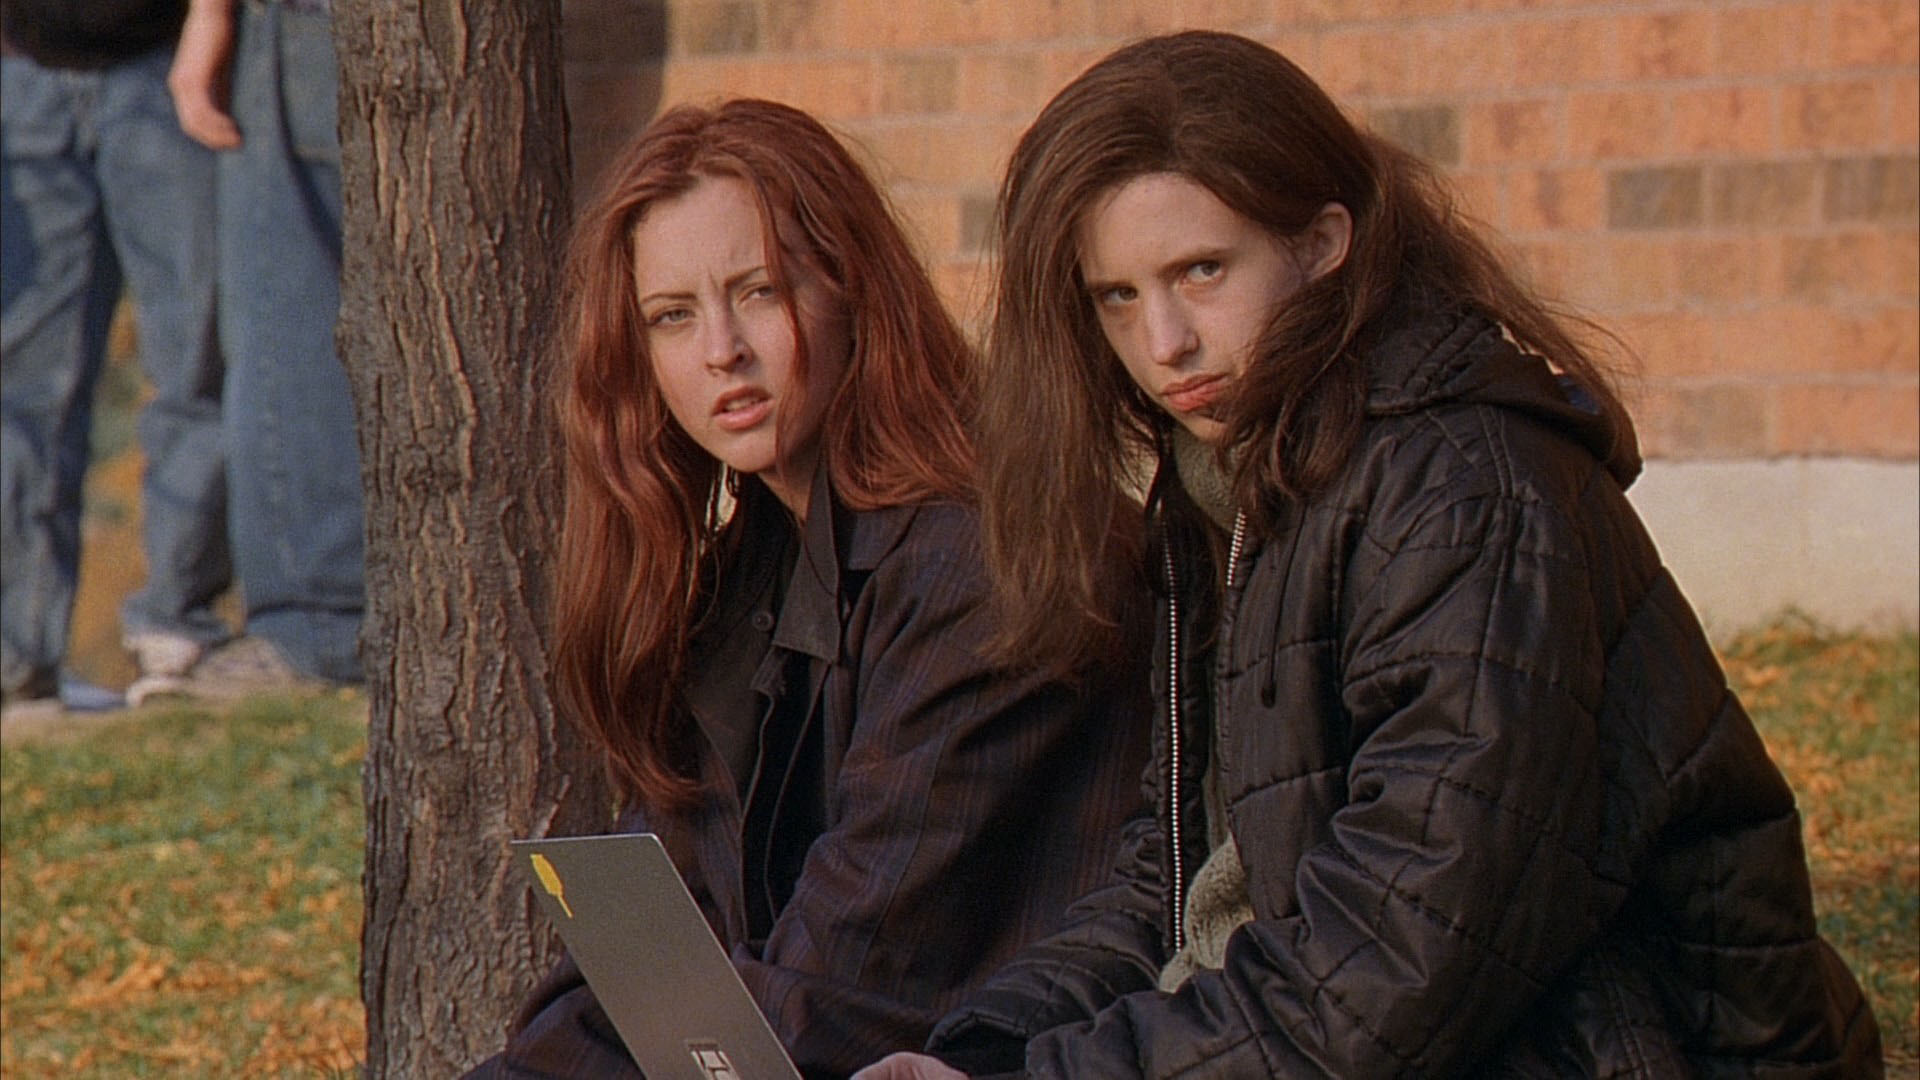 Oct 2 107: Ginger Snaps 2: Unleashed (2004) with Joshua Cross.